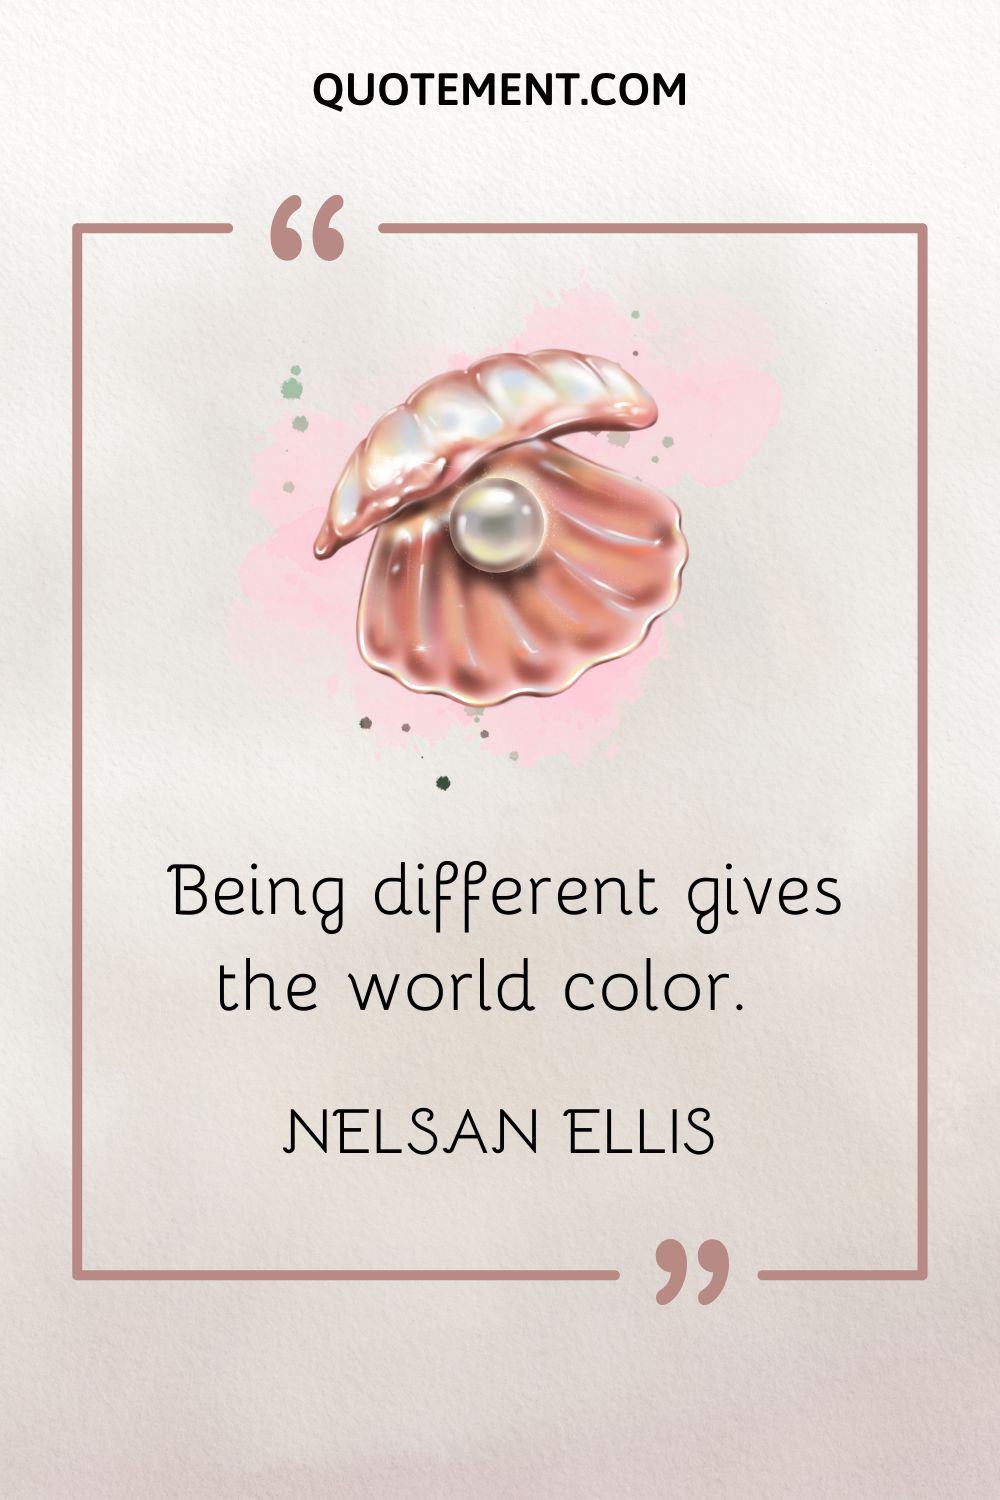 Illustration representing a powerful be different quote.